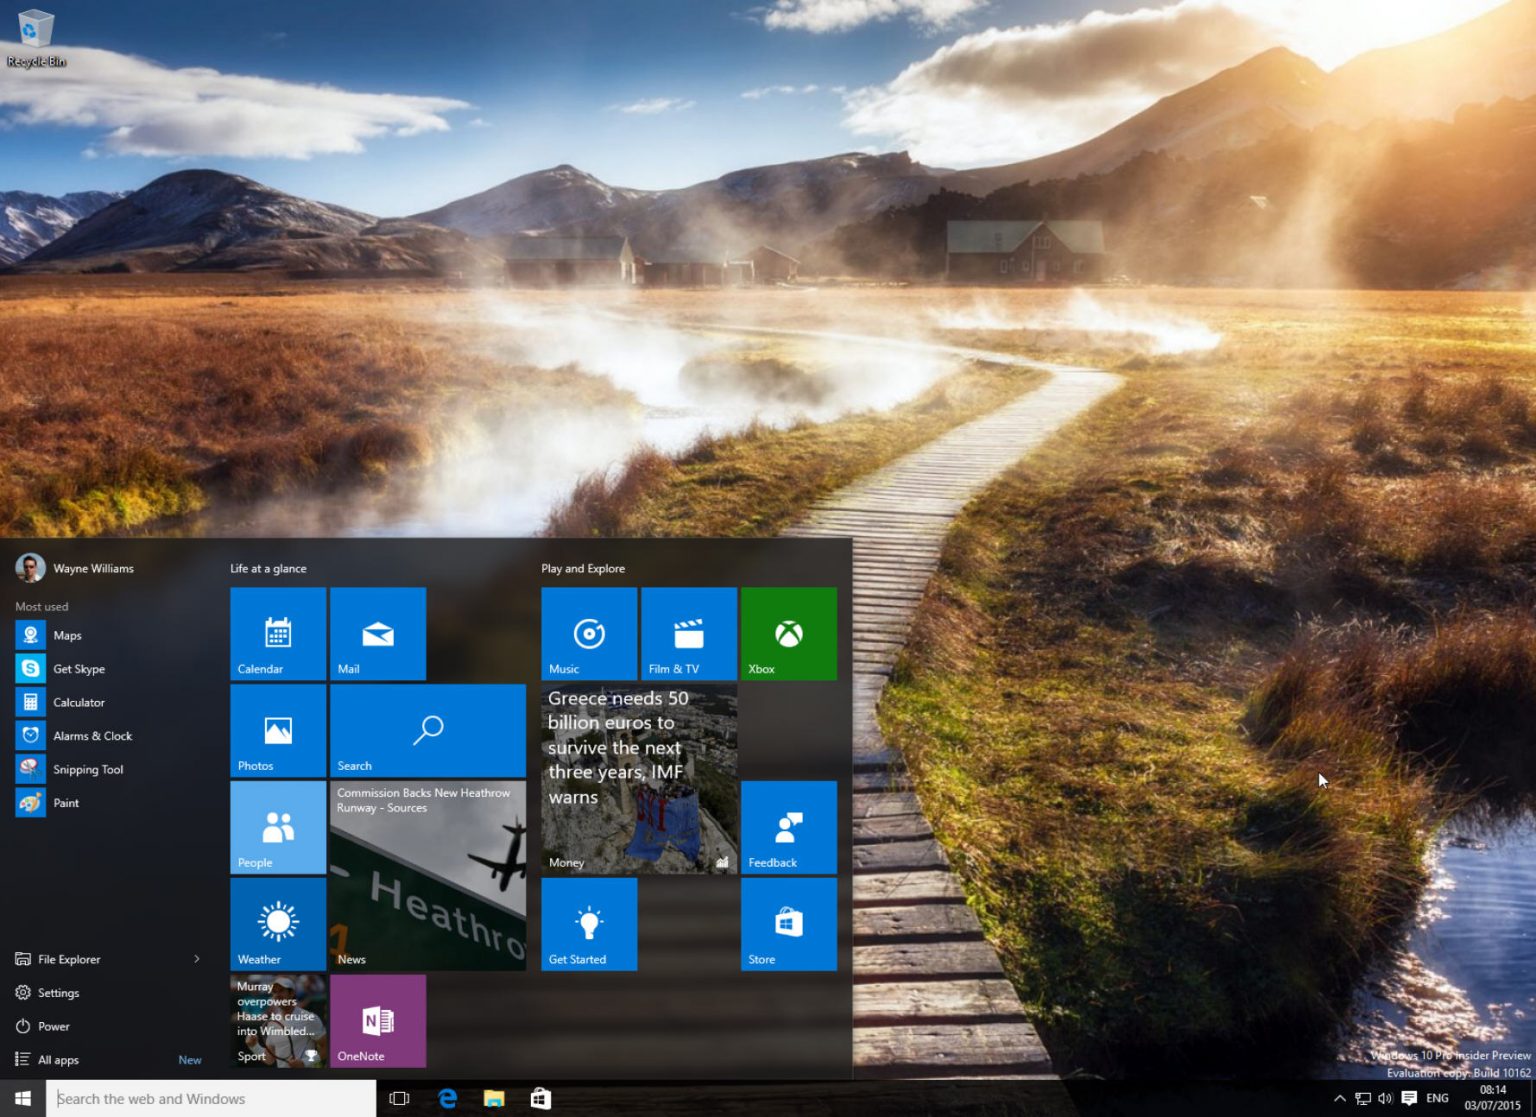 install a preview build of windows 10